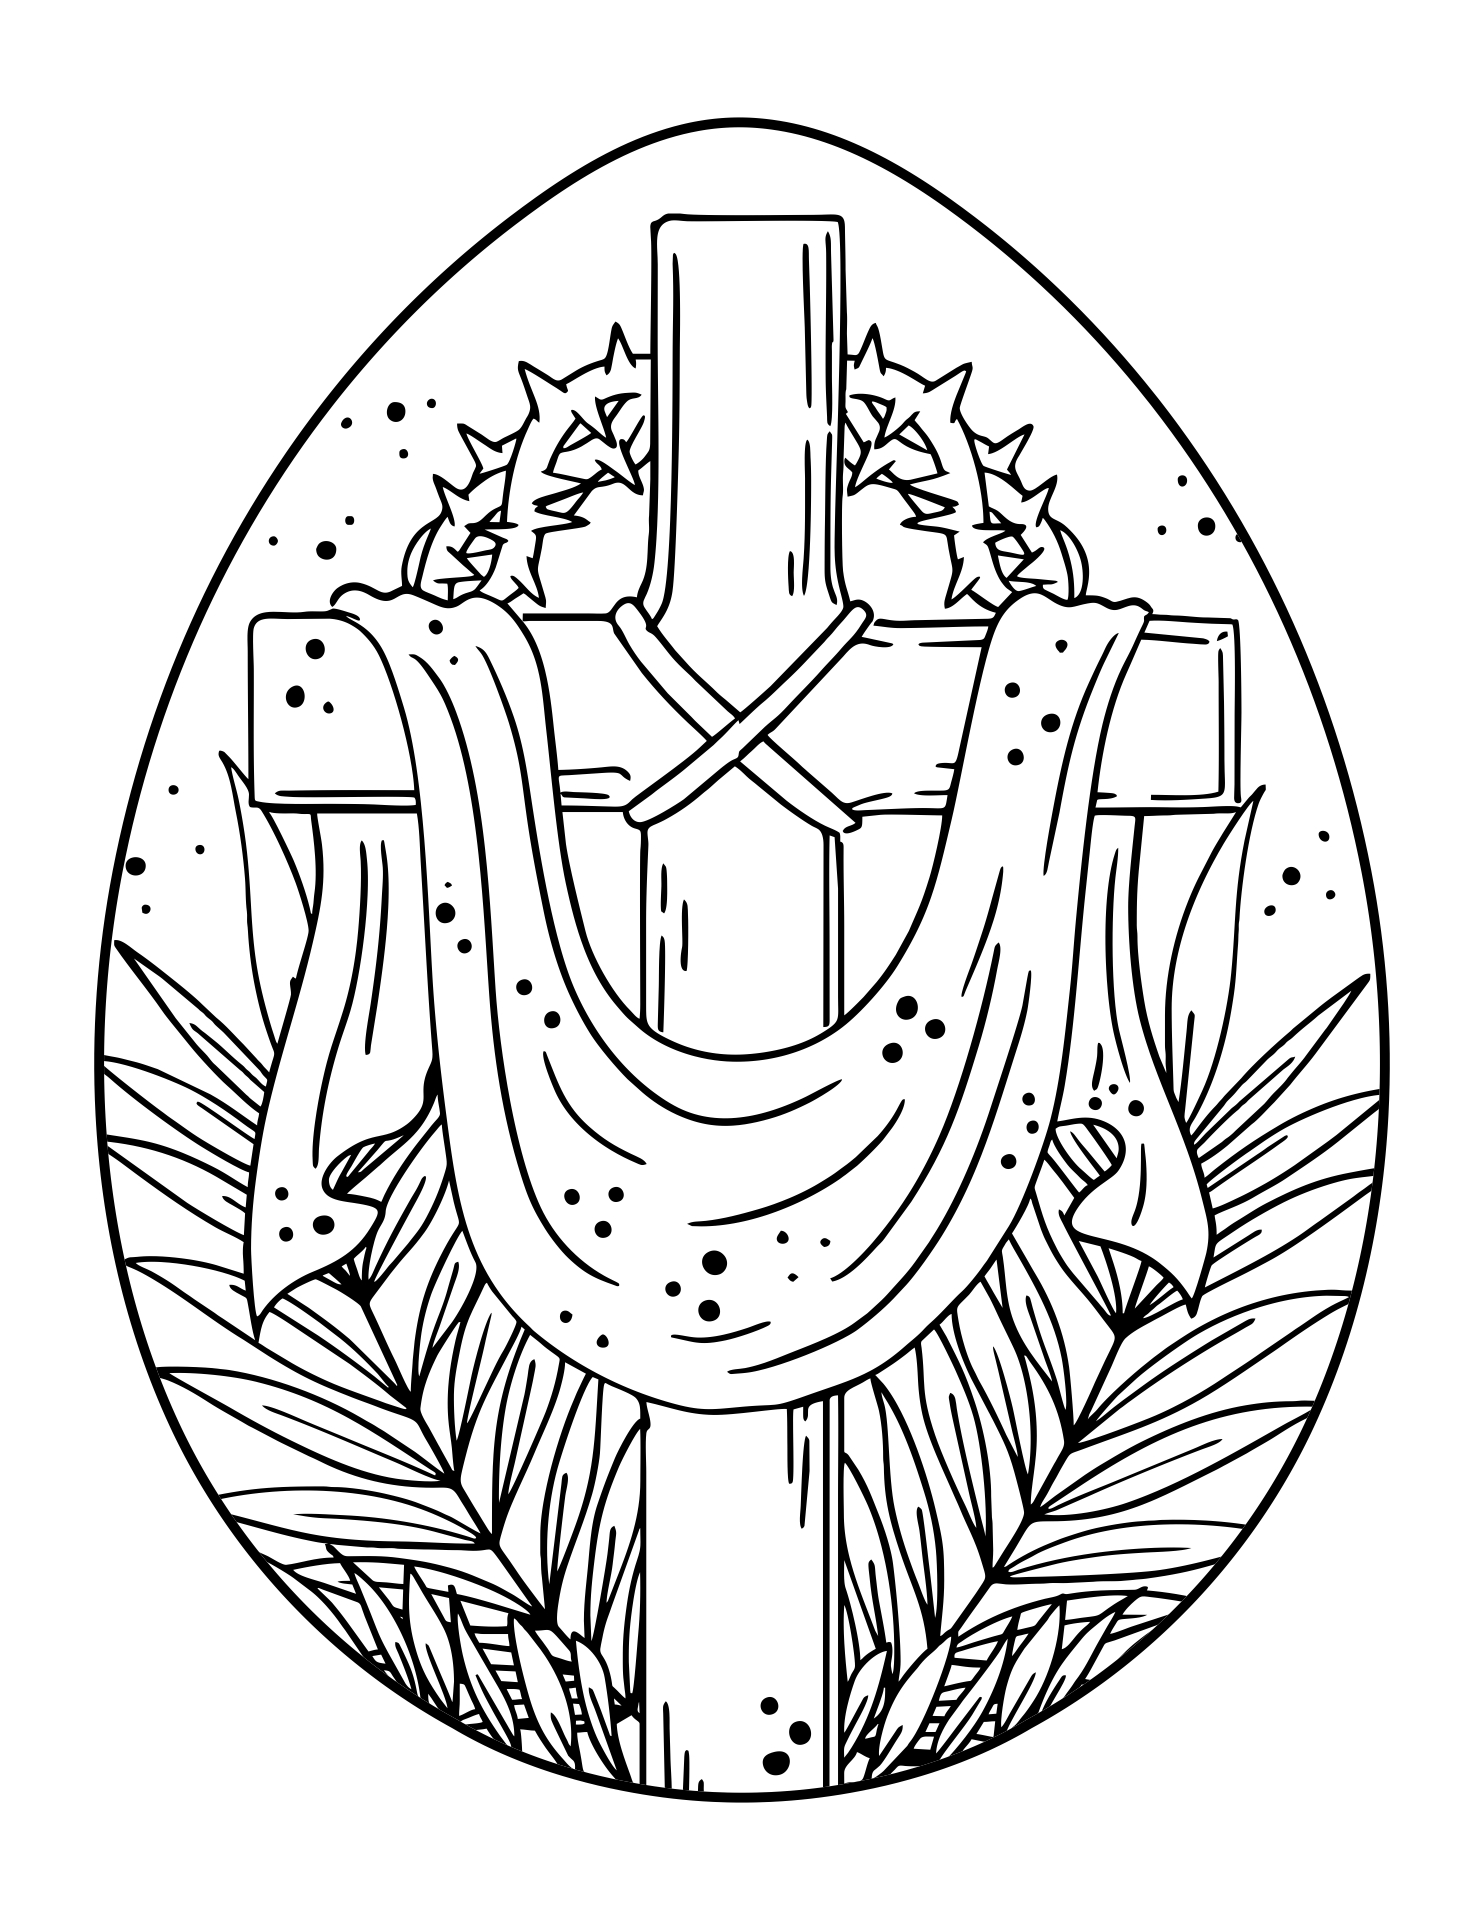 5 Best Images of Adult Coloring Pages Free Printables Easter Cross